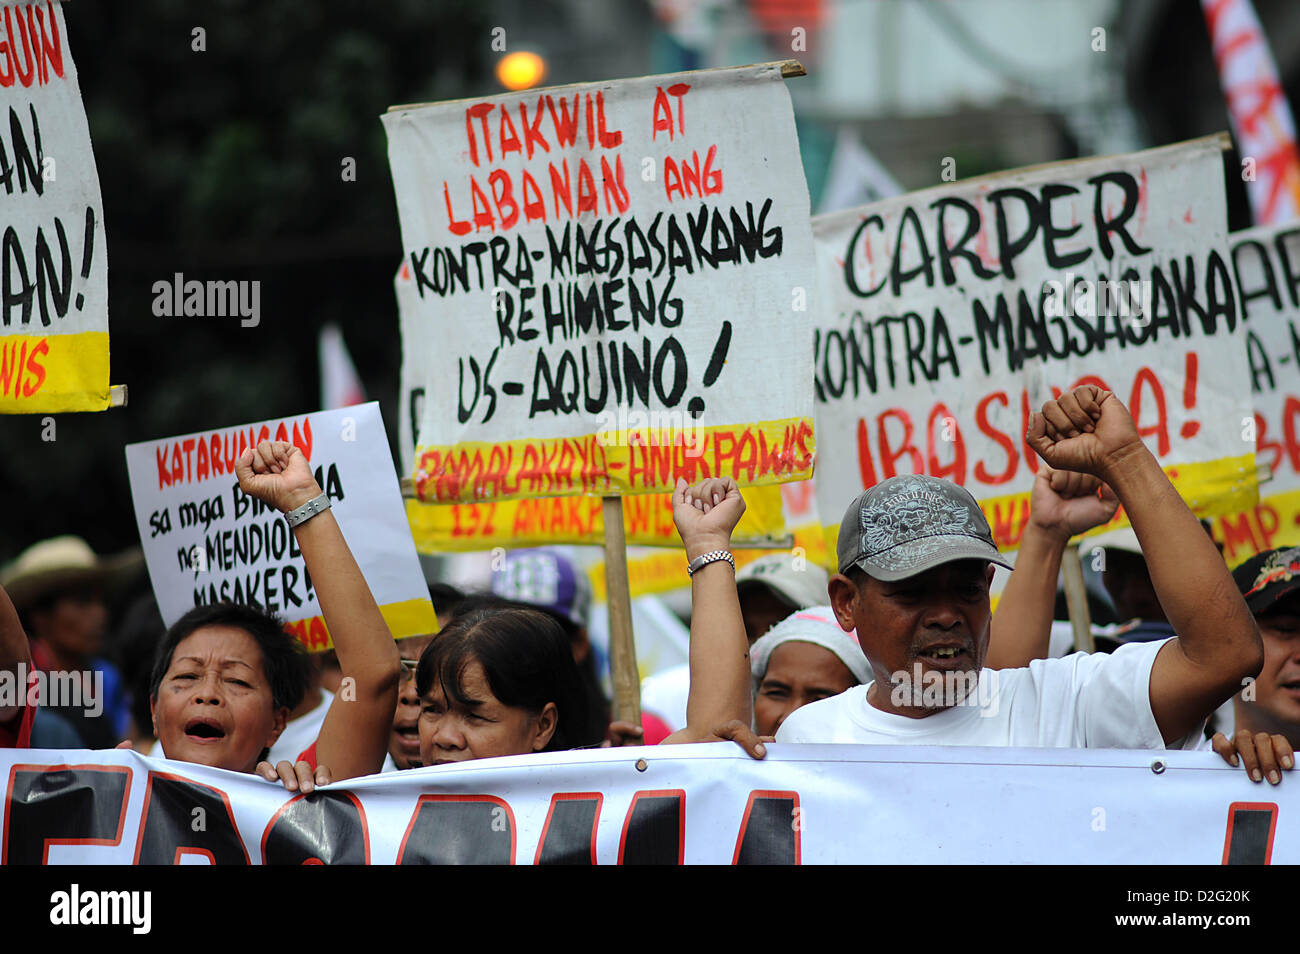 Manila, Philippines. 22nd January 2013. Demonstrators stage a protest at the Mendiola Peace Arch, outside the presidential palace, in Manila, Philippines, Tuesday, Jan. 22, 2013, during the 26th anniversary of the Mendiola Massacre. Various groups marched to the Mendiola Peace Arch to commemorate the 26th anniversary of the Mendiola Massacre which saw 13 people killed after police opened fire on demonstrators pressing for land reform. Credit:  Ezra Acayan / Alamy Live News Stock Photo